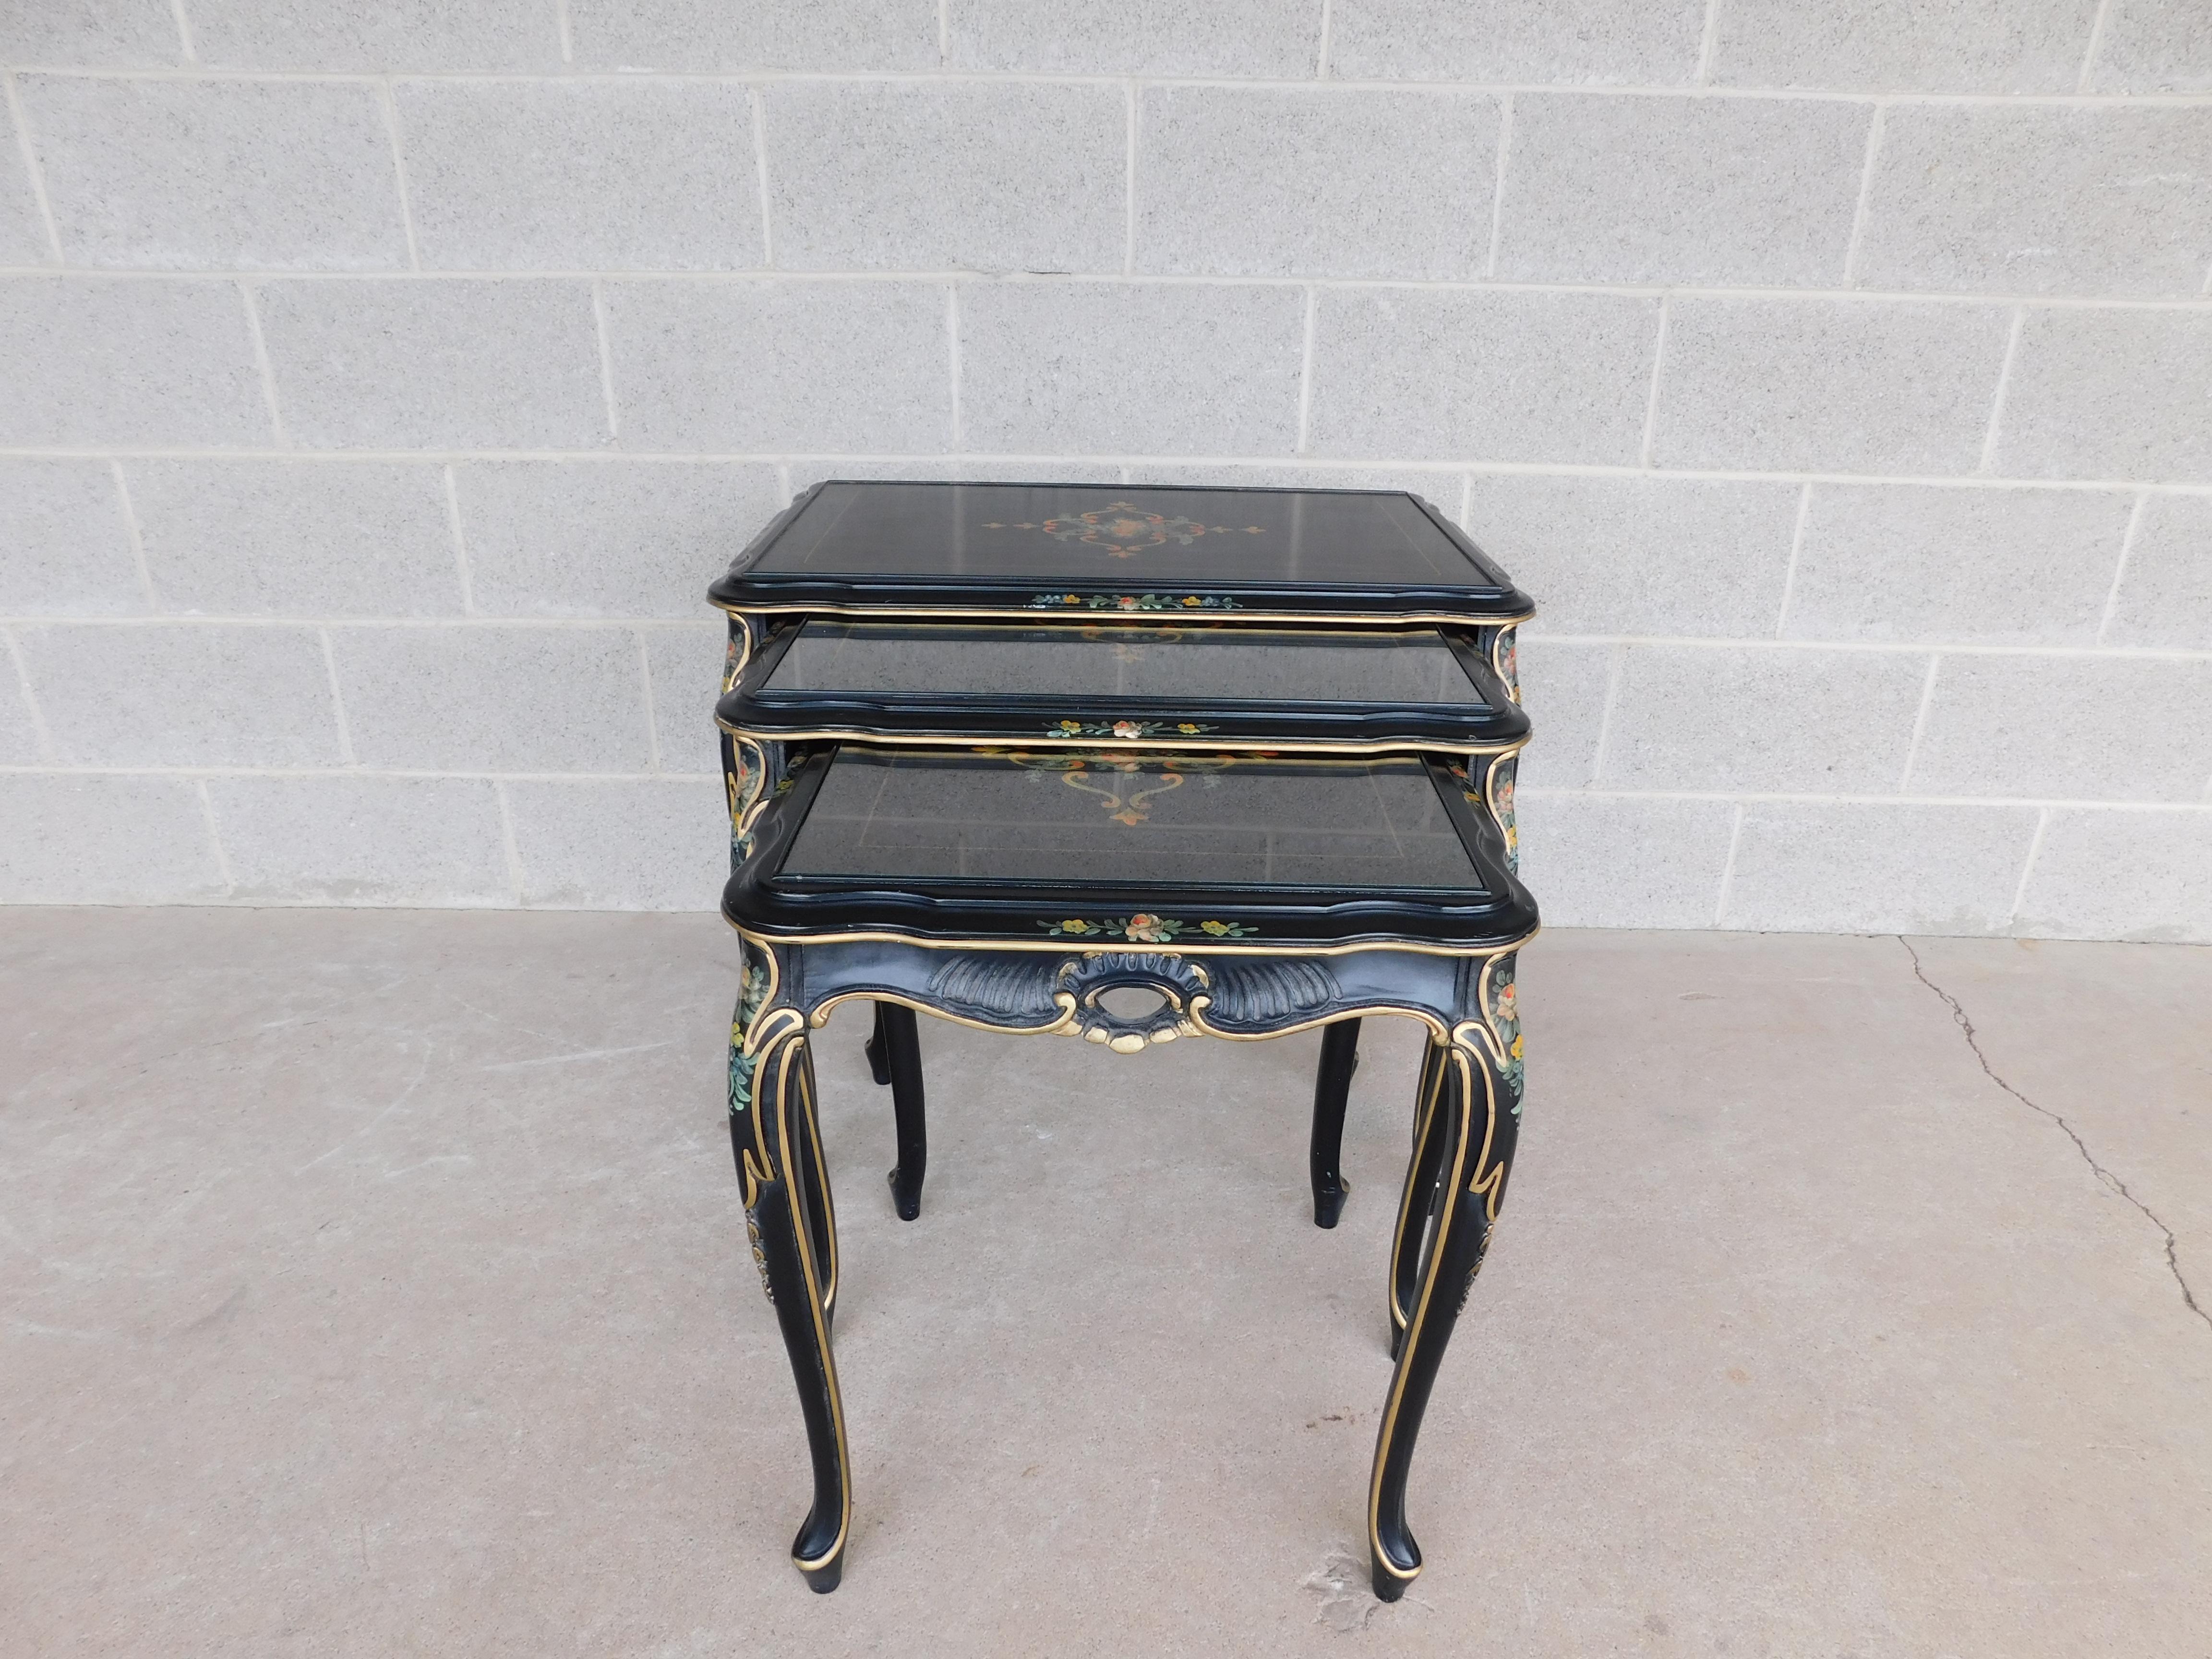 Features High Quality Construction, Carved Detail Accents in Gold, Black Color Painted, . Approx 60 Years Old, Removable Glass on Each Table

Very Good Vintage Condition, original finish - small chip on top table glass - see all photos - may show